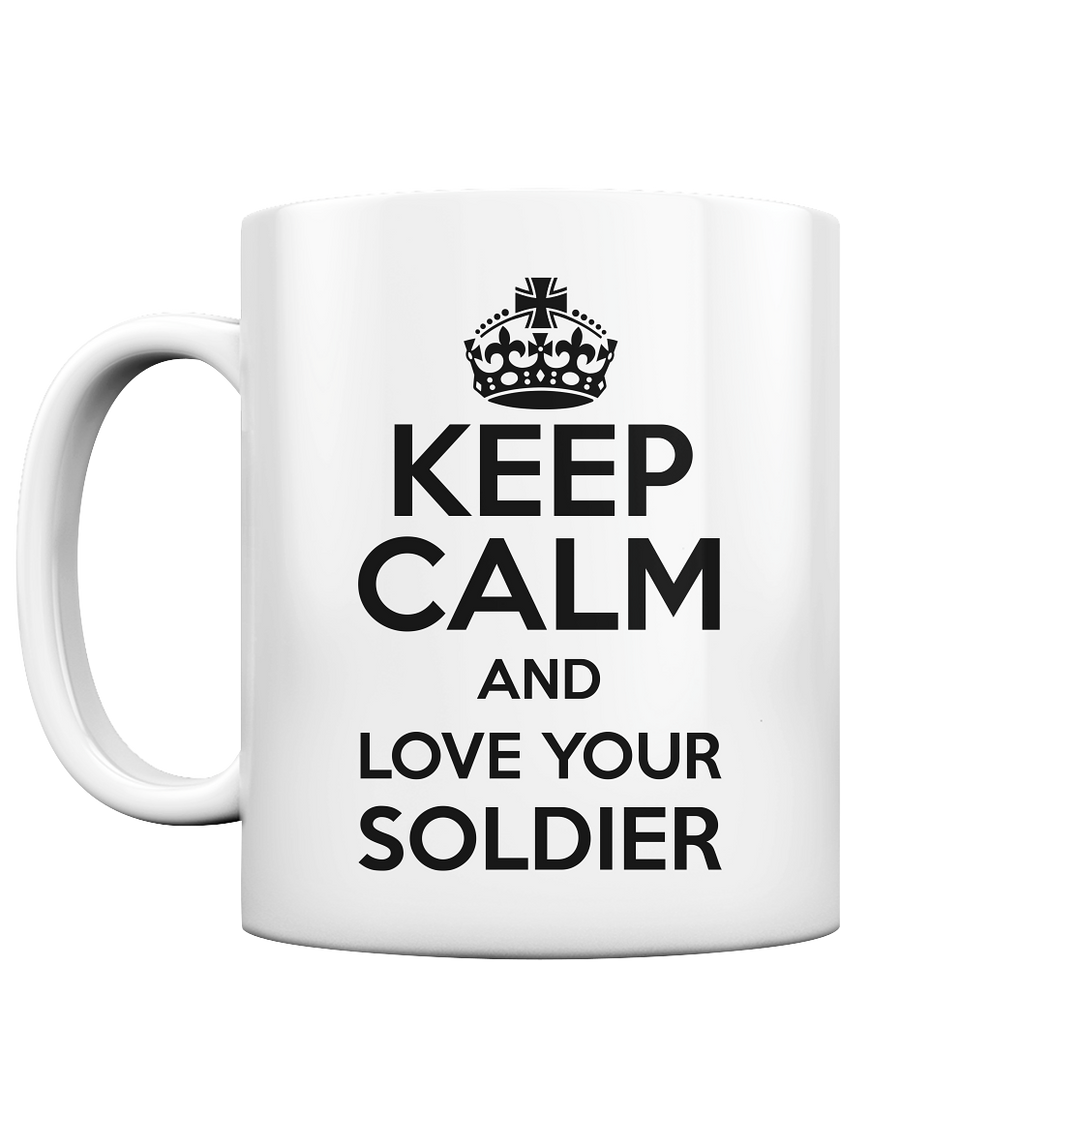 "Love Your Soldier" - Tasse glossy